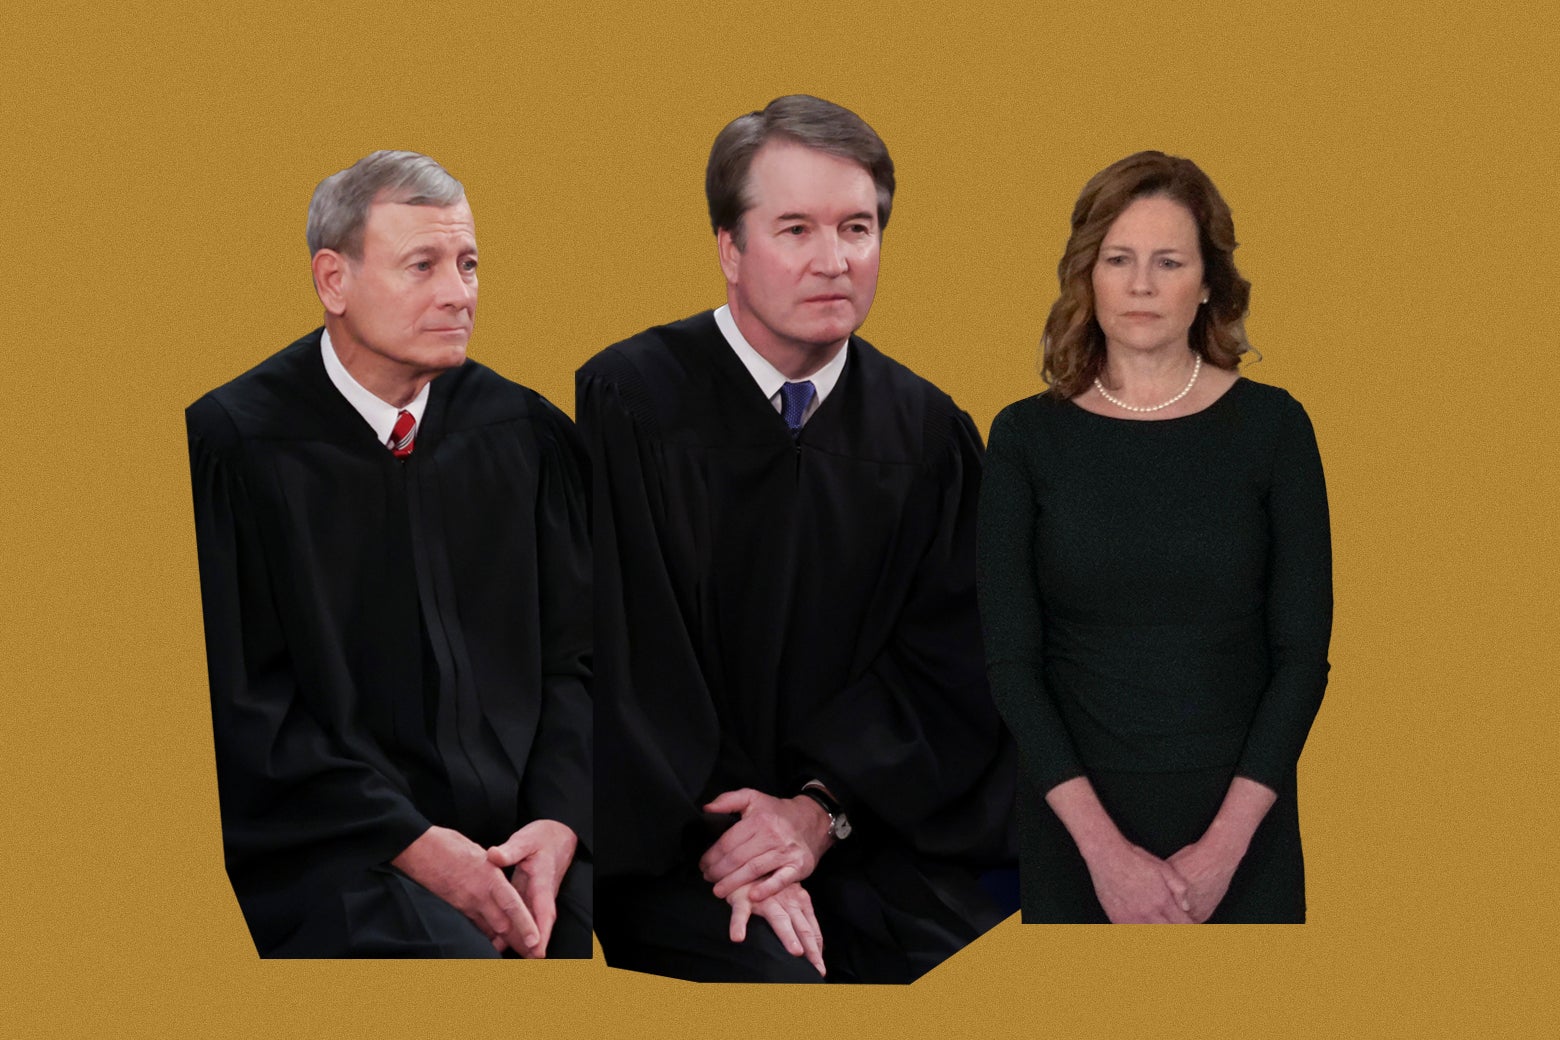 Supreme Court Justices Kavanaugh, Barrett, and Roberts looking annoyed.